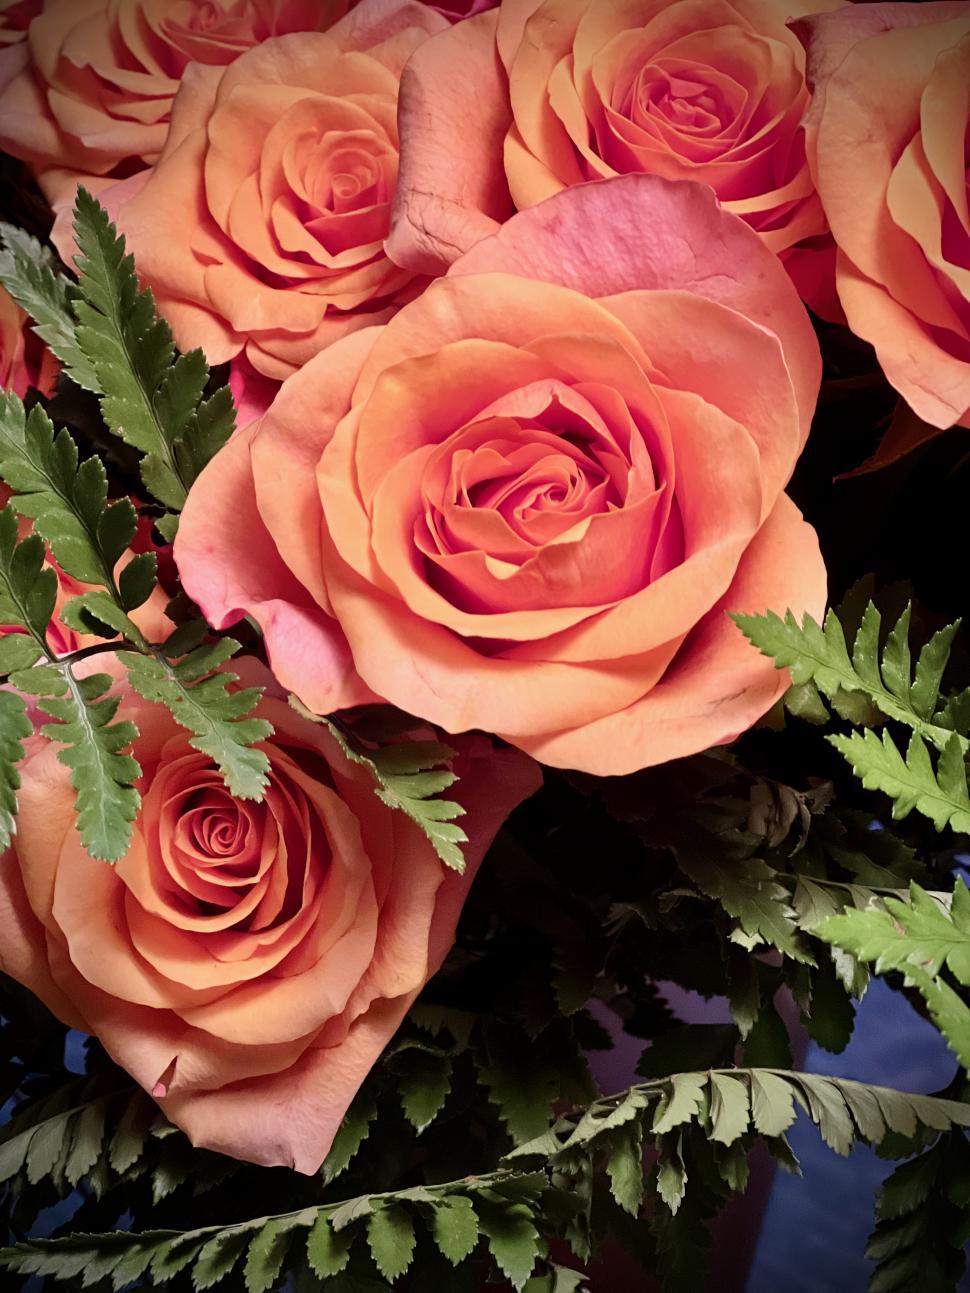 Free Image of Bouquet of peach-colored roses close-up 